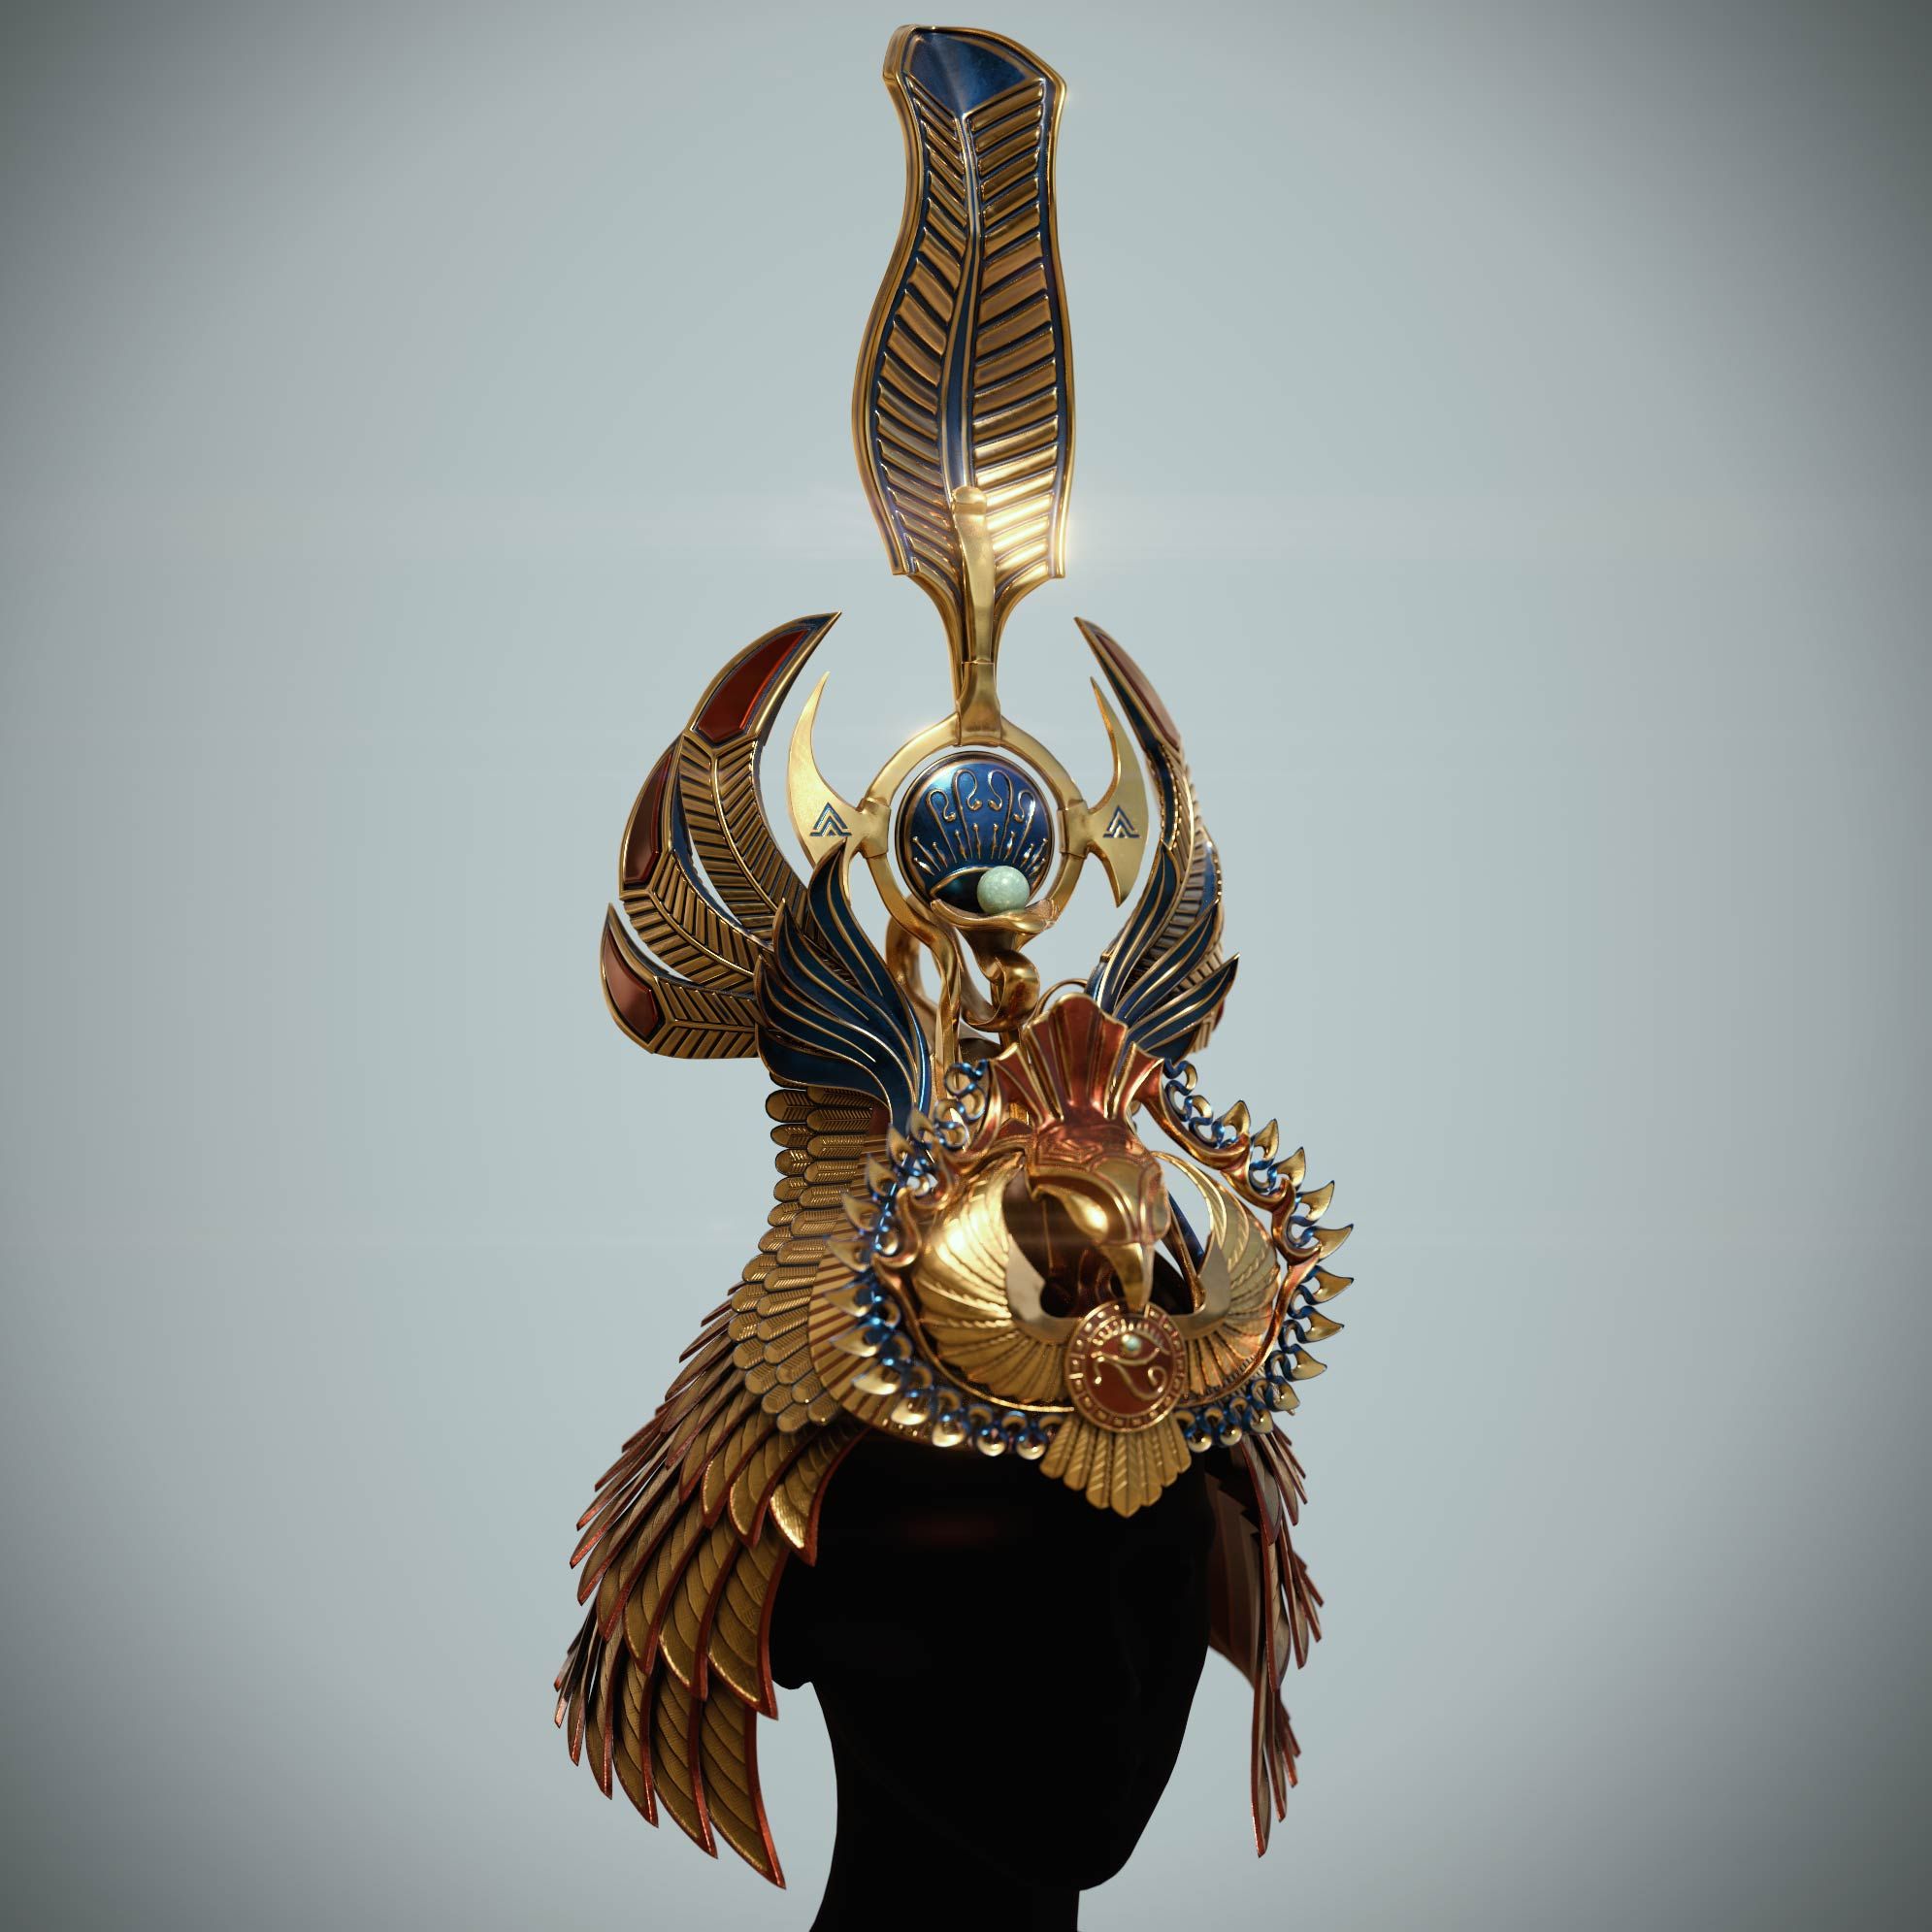 cleopatras_crown_substance_painter_texturing-1